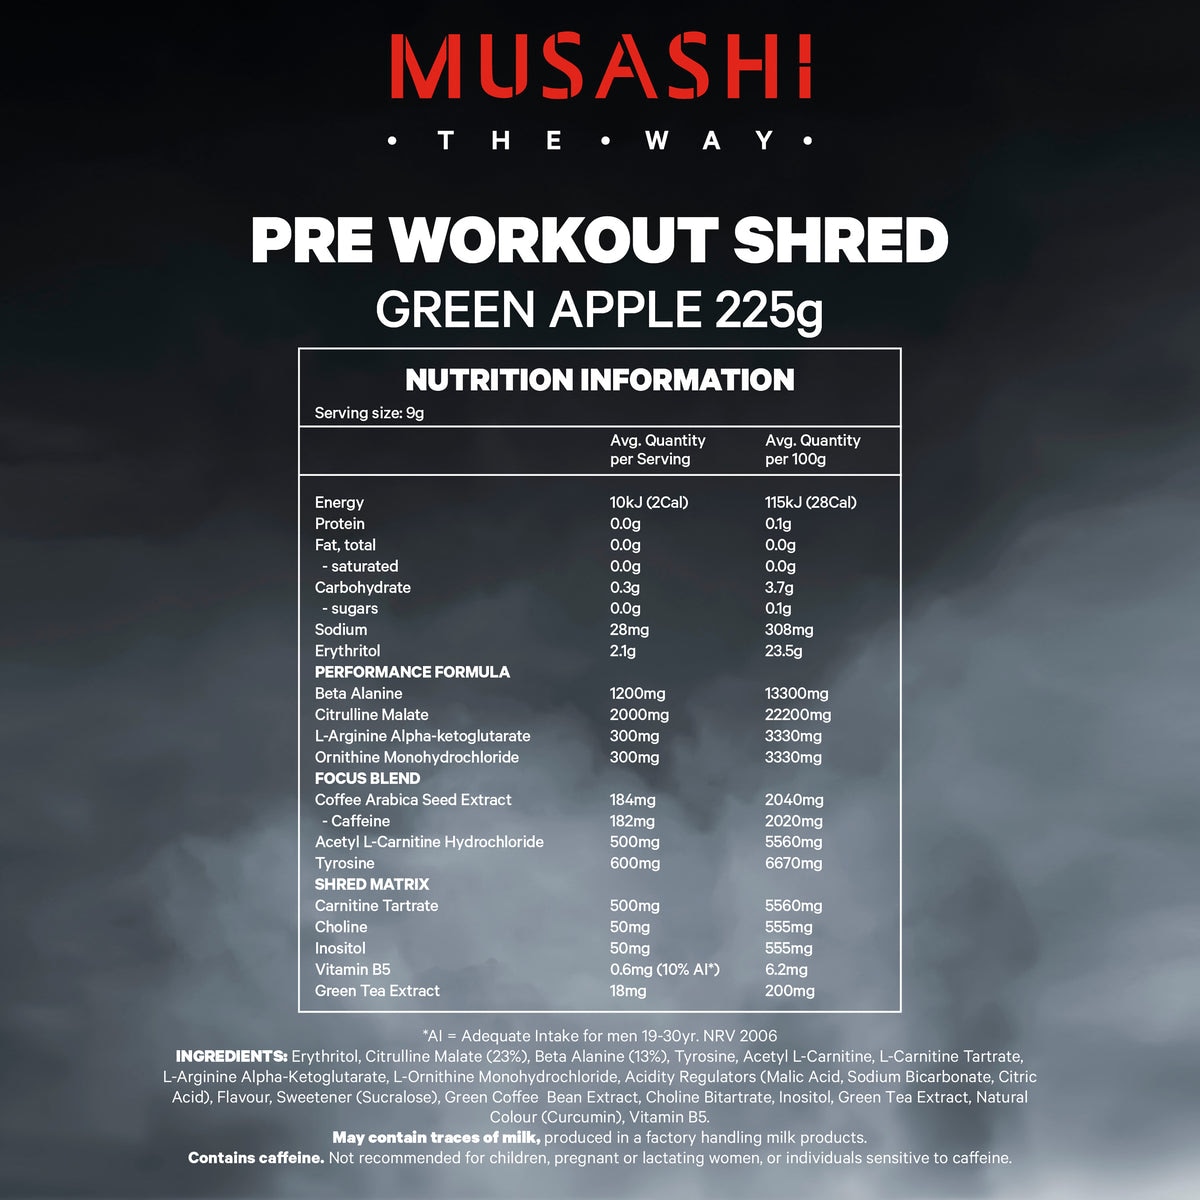 Musashi Pre Workout Shred Green Apple 225g